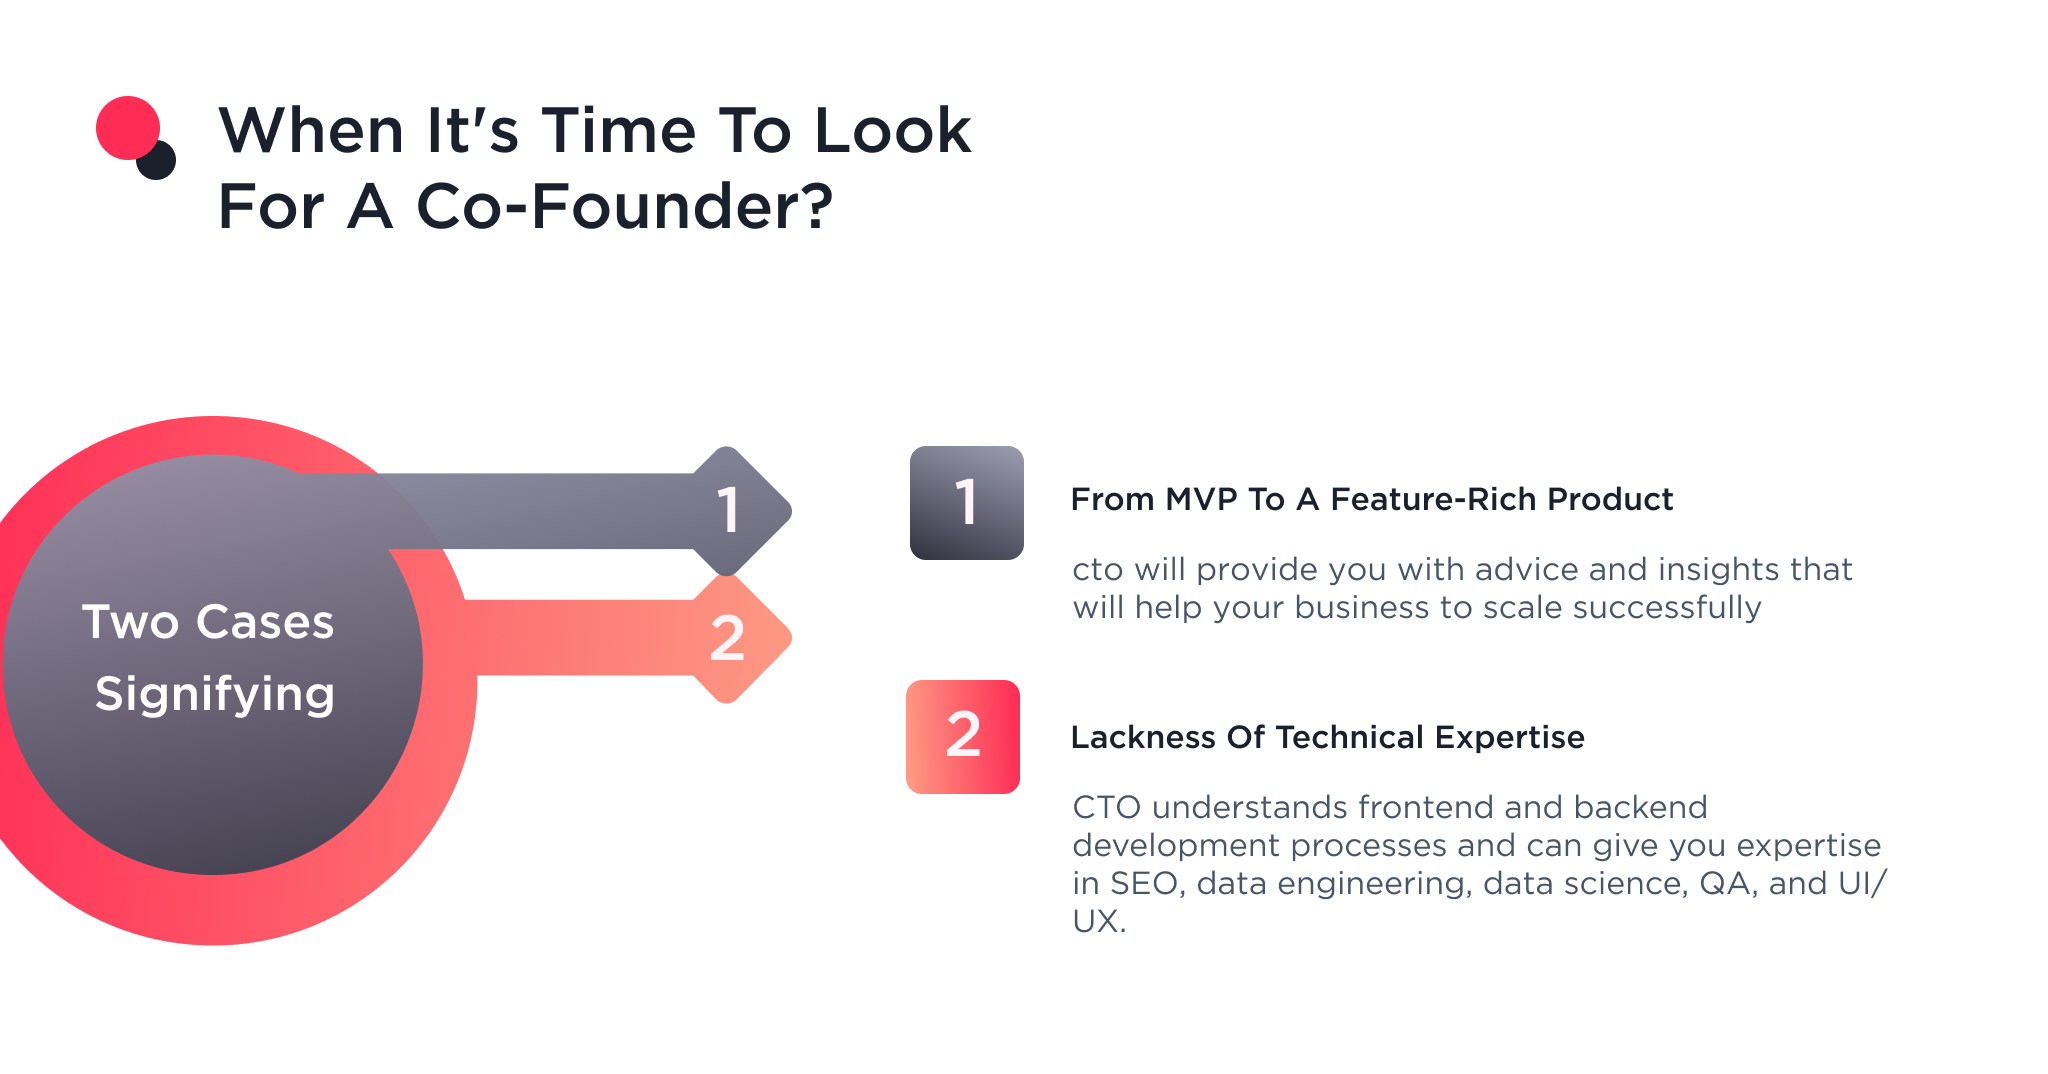 Illustration shows when it's time for finding a tech co-founder